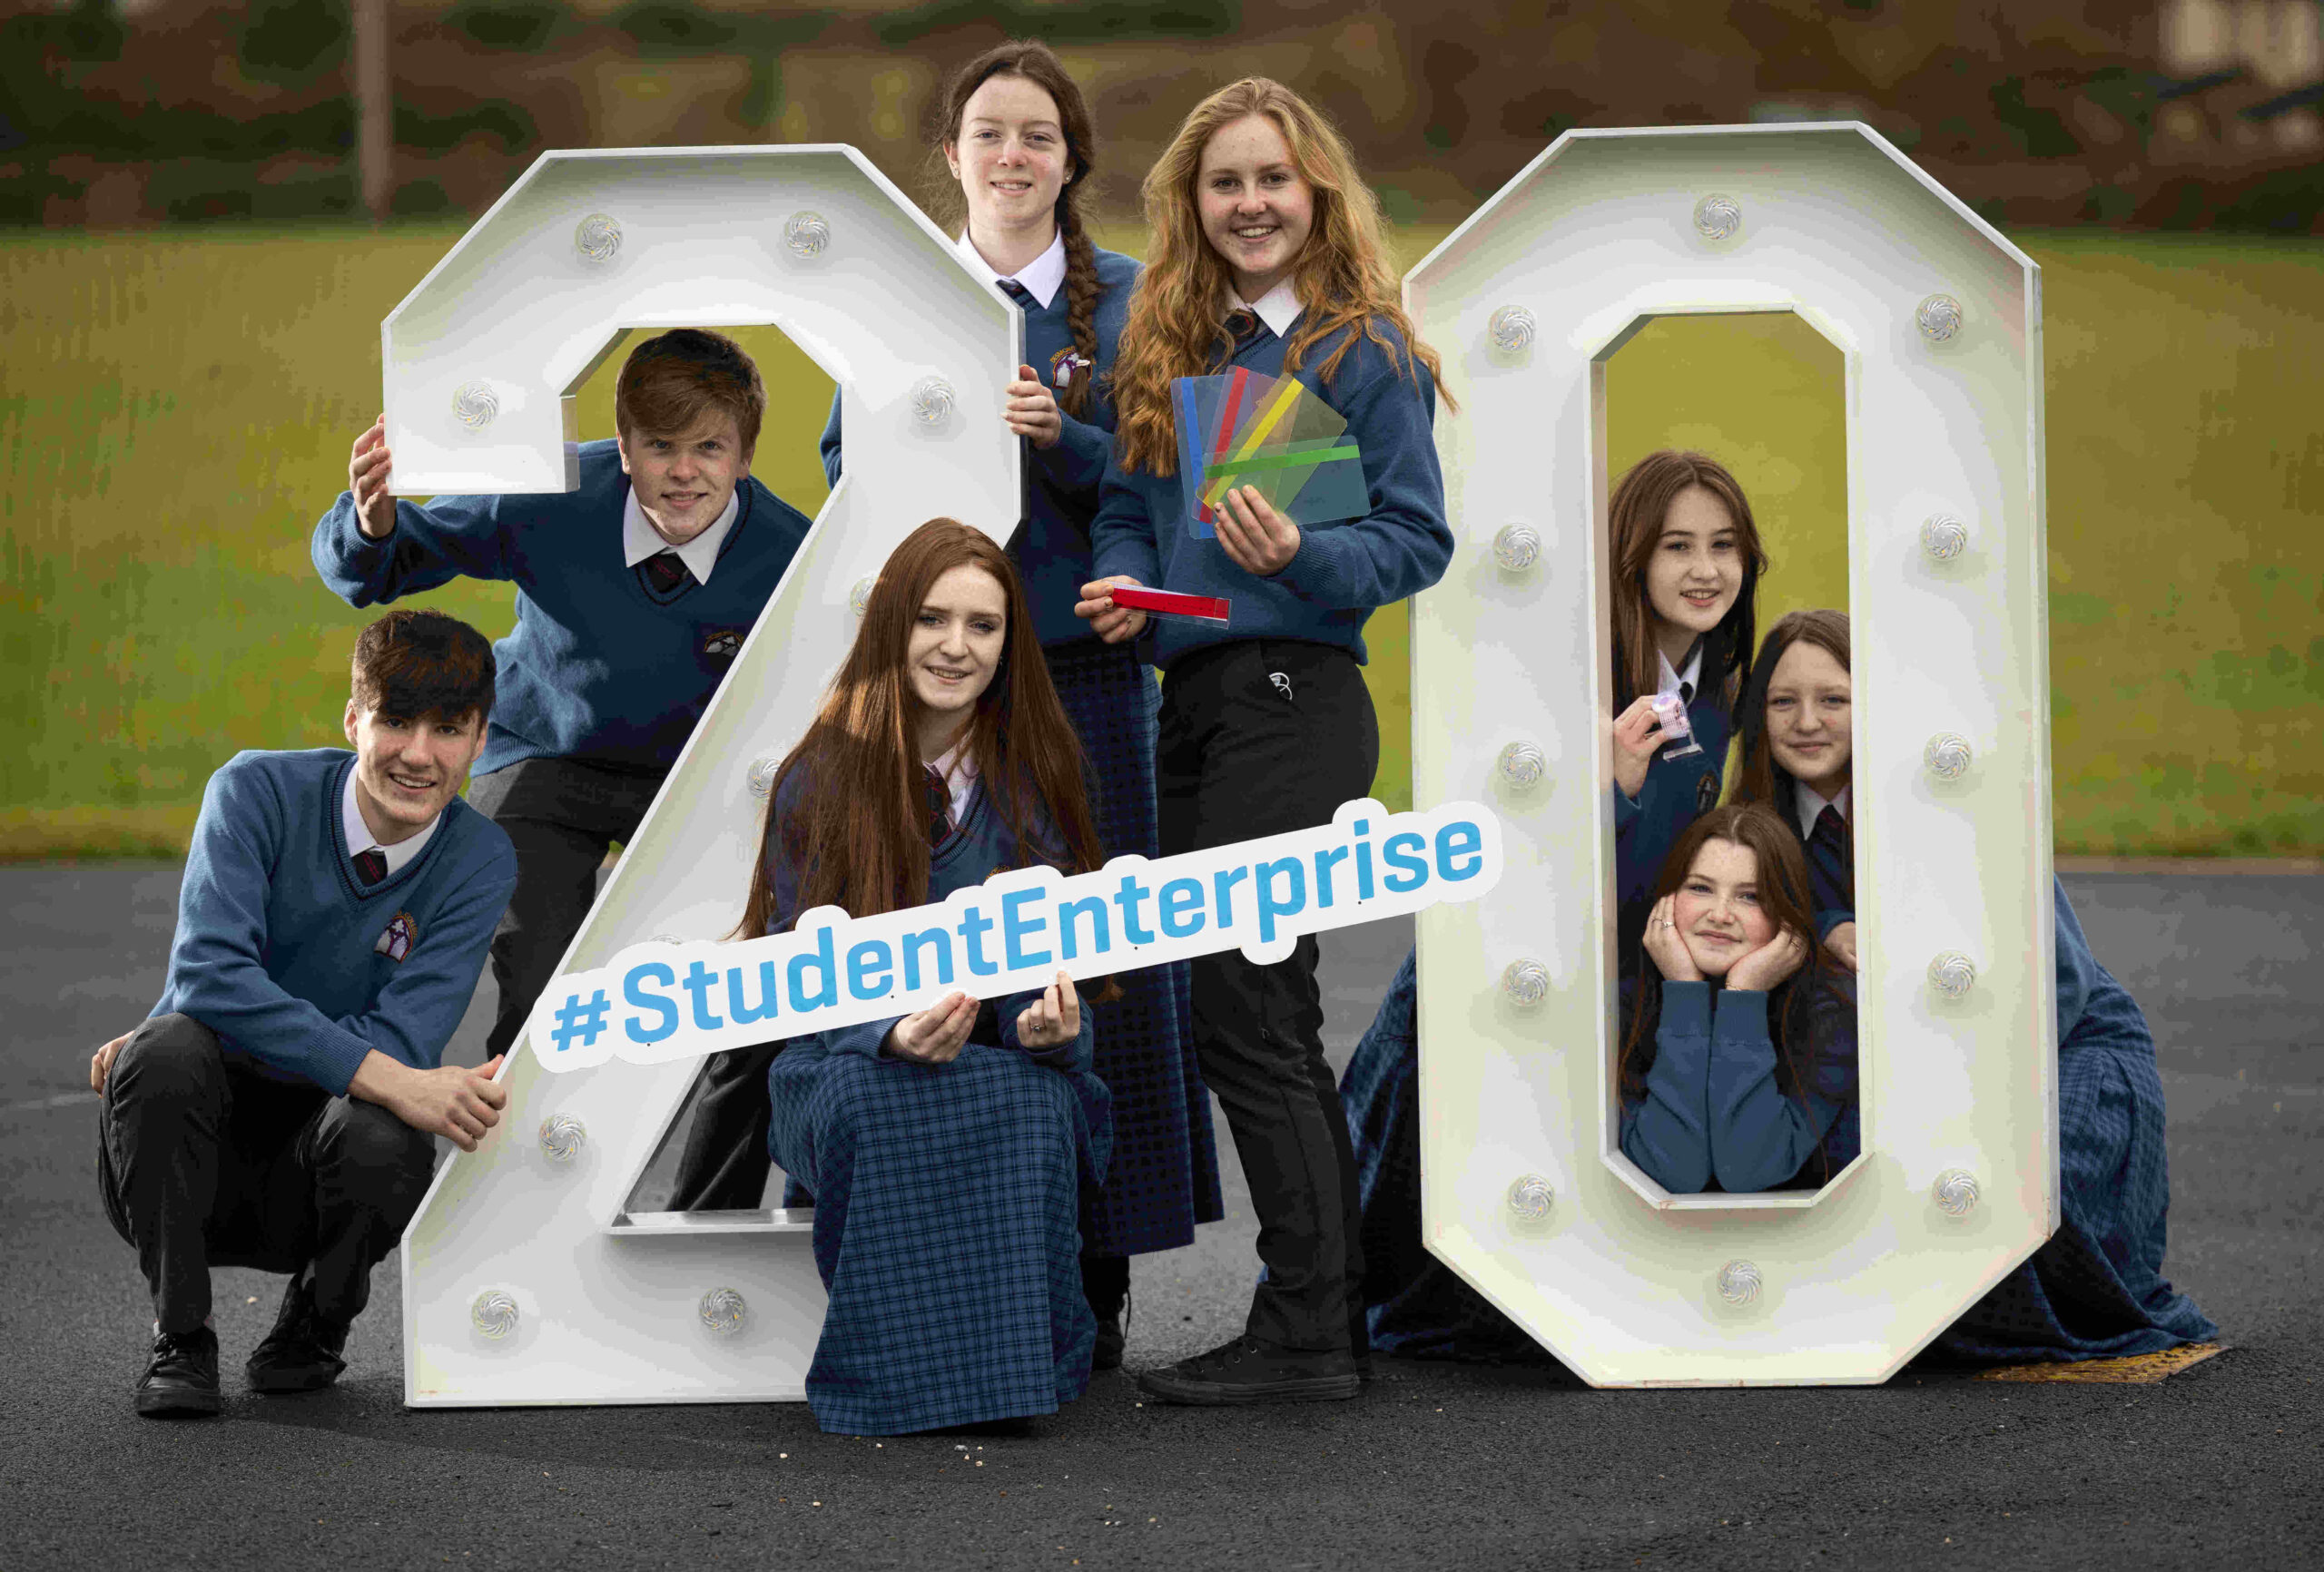 Limerick student enterprise programme Limerick has had success over the years with Zero Fog from Desmond College, Newcastle West picking up a National Award last year